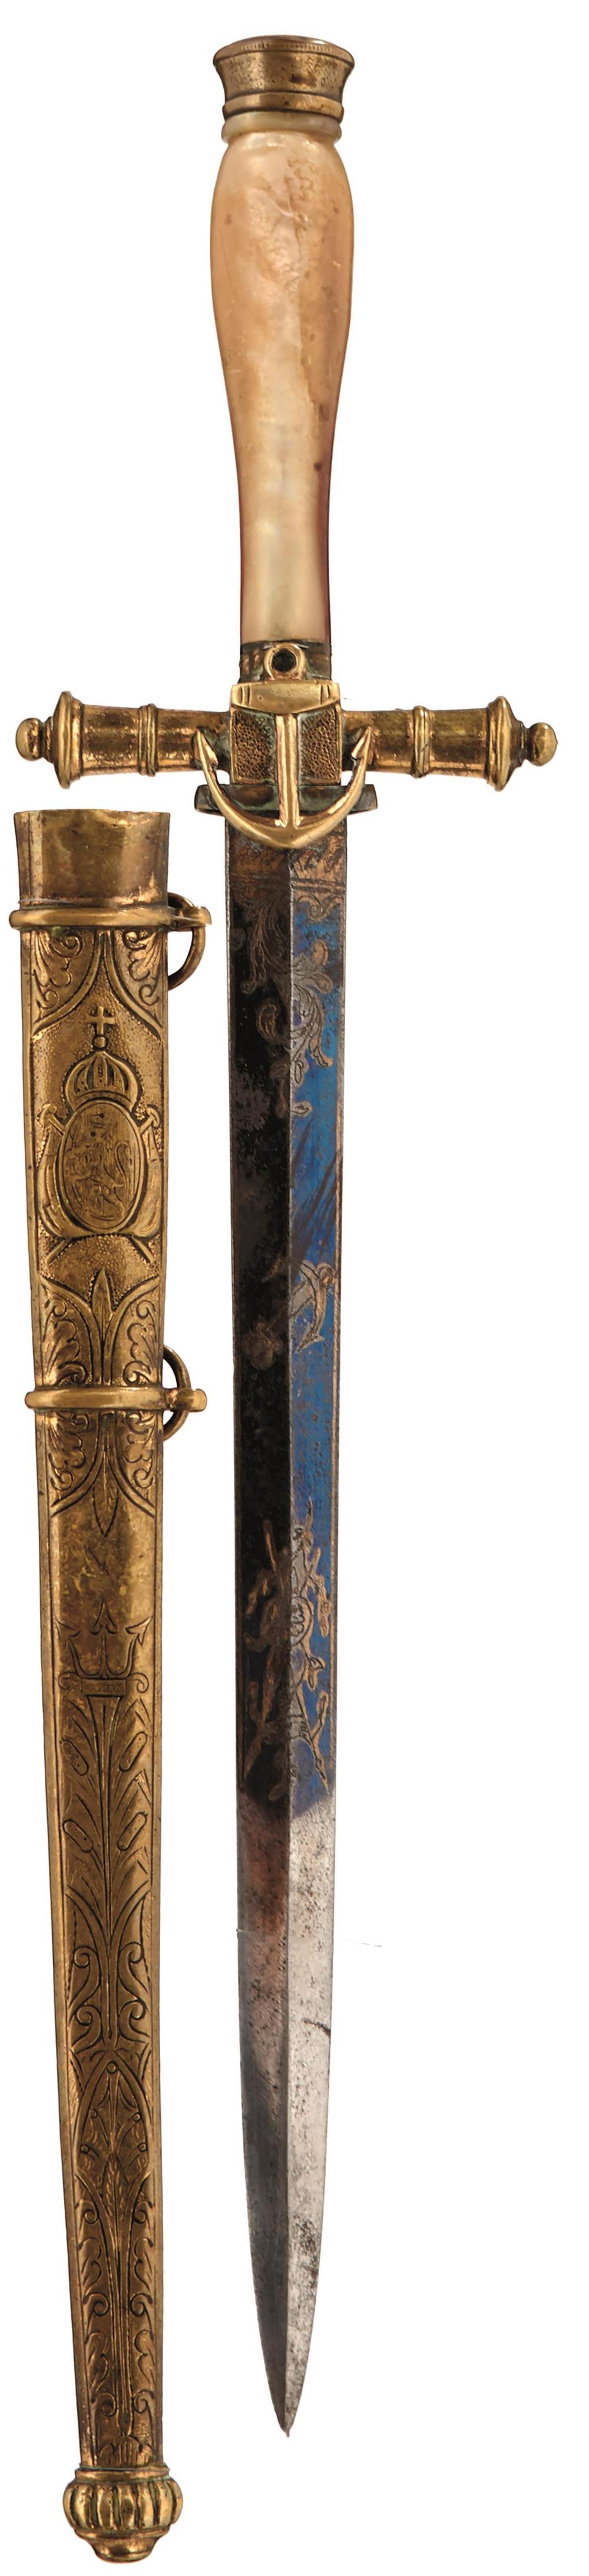 A 19TH CENTURY NORWEGIAN NAVAL OFFICER'S DIRK, 21cm flattened diamond section blade decorated with